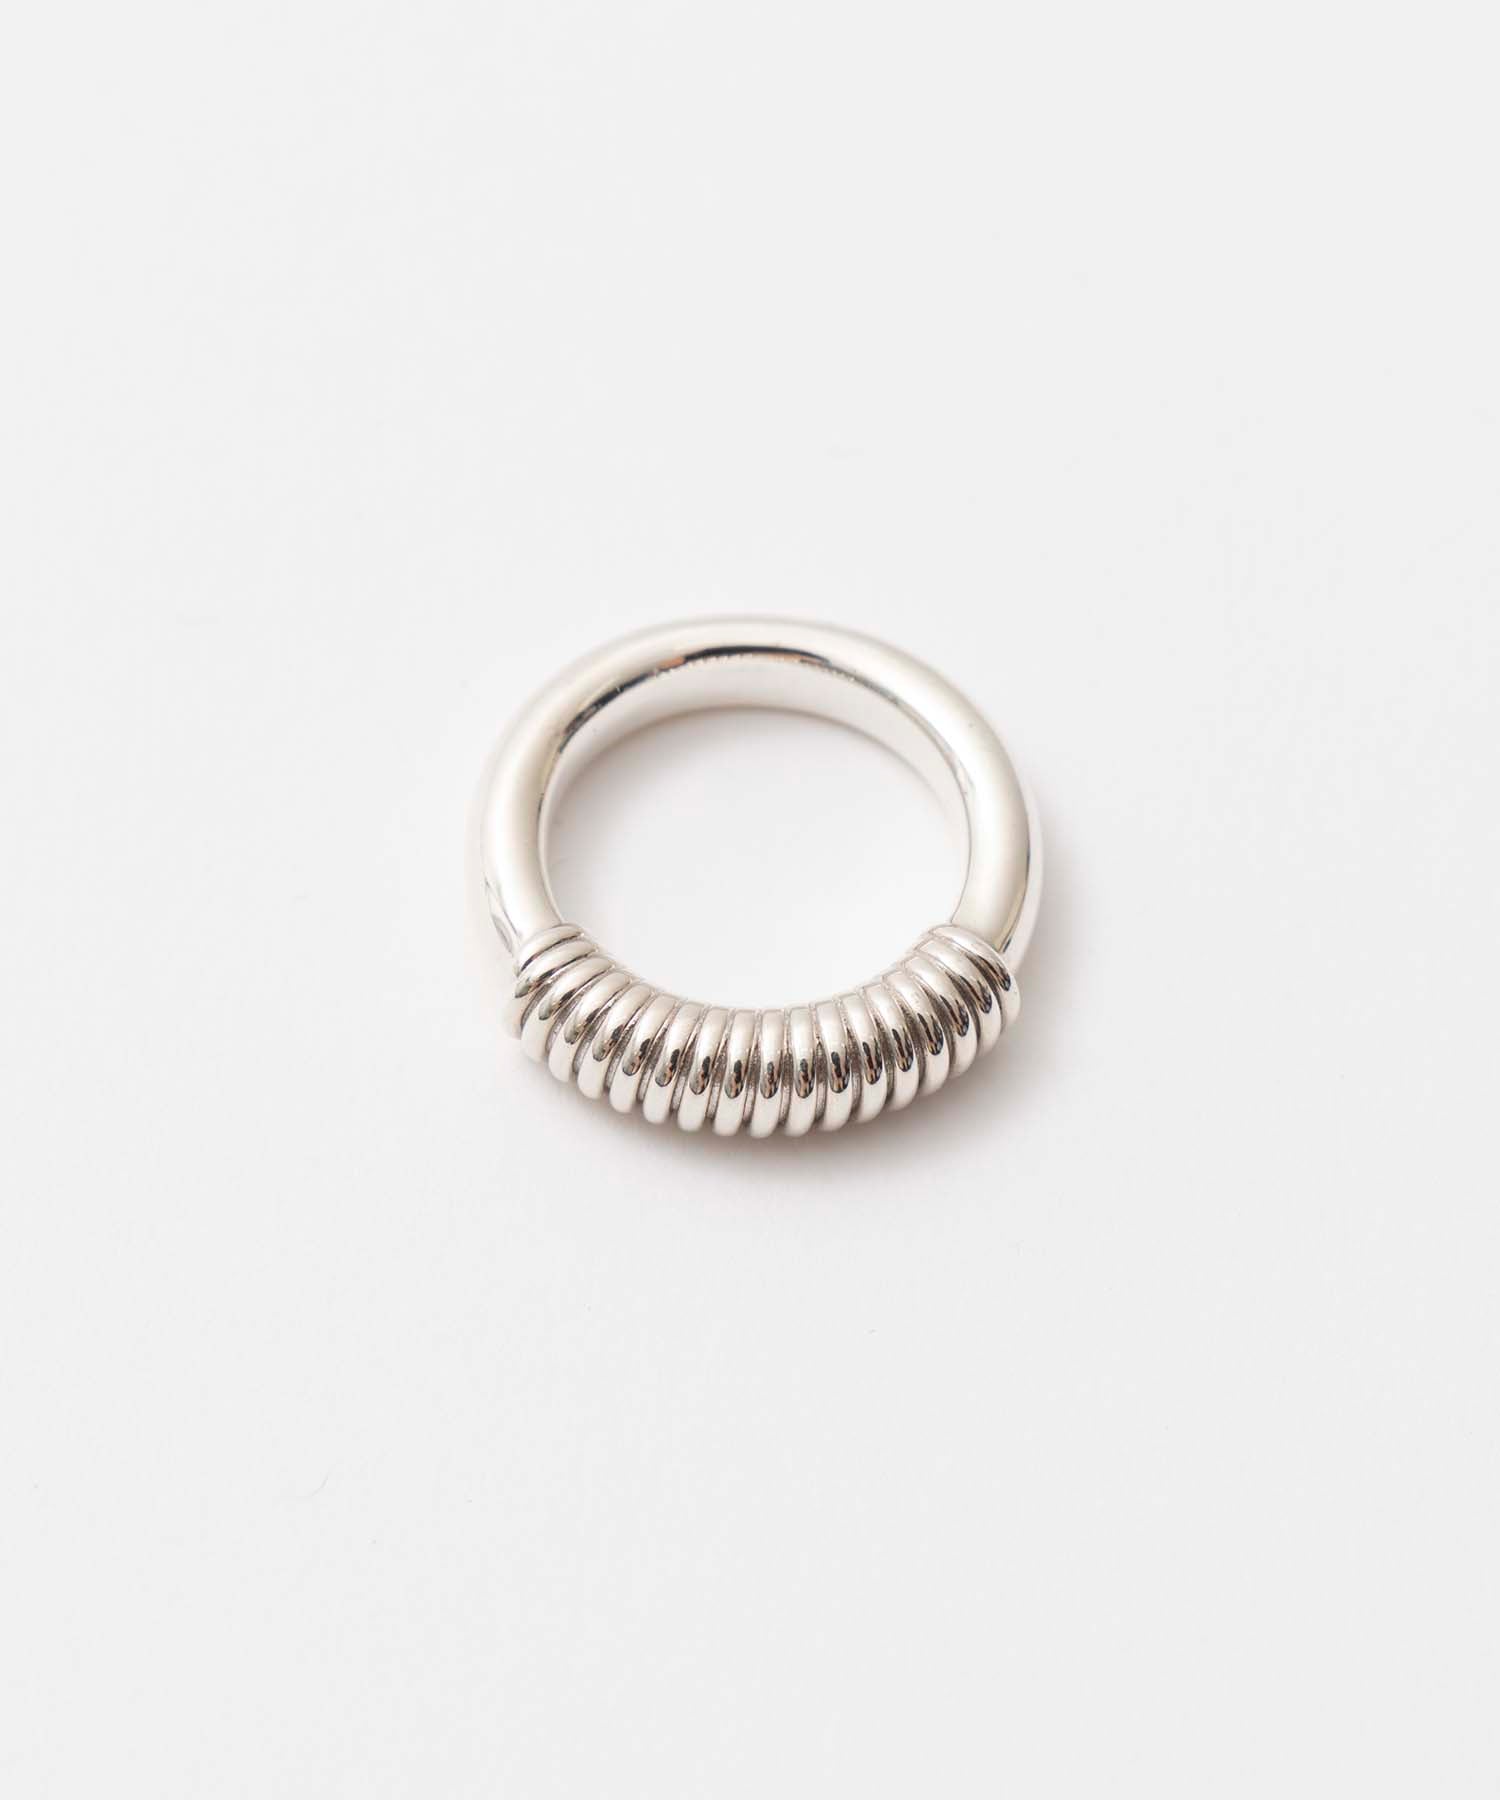 【hacot by MAISON SPECIAL】Spring Ring